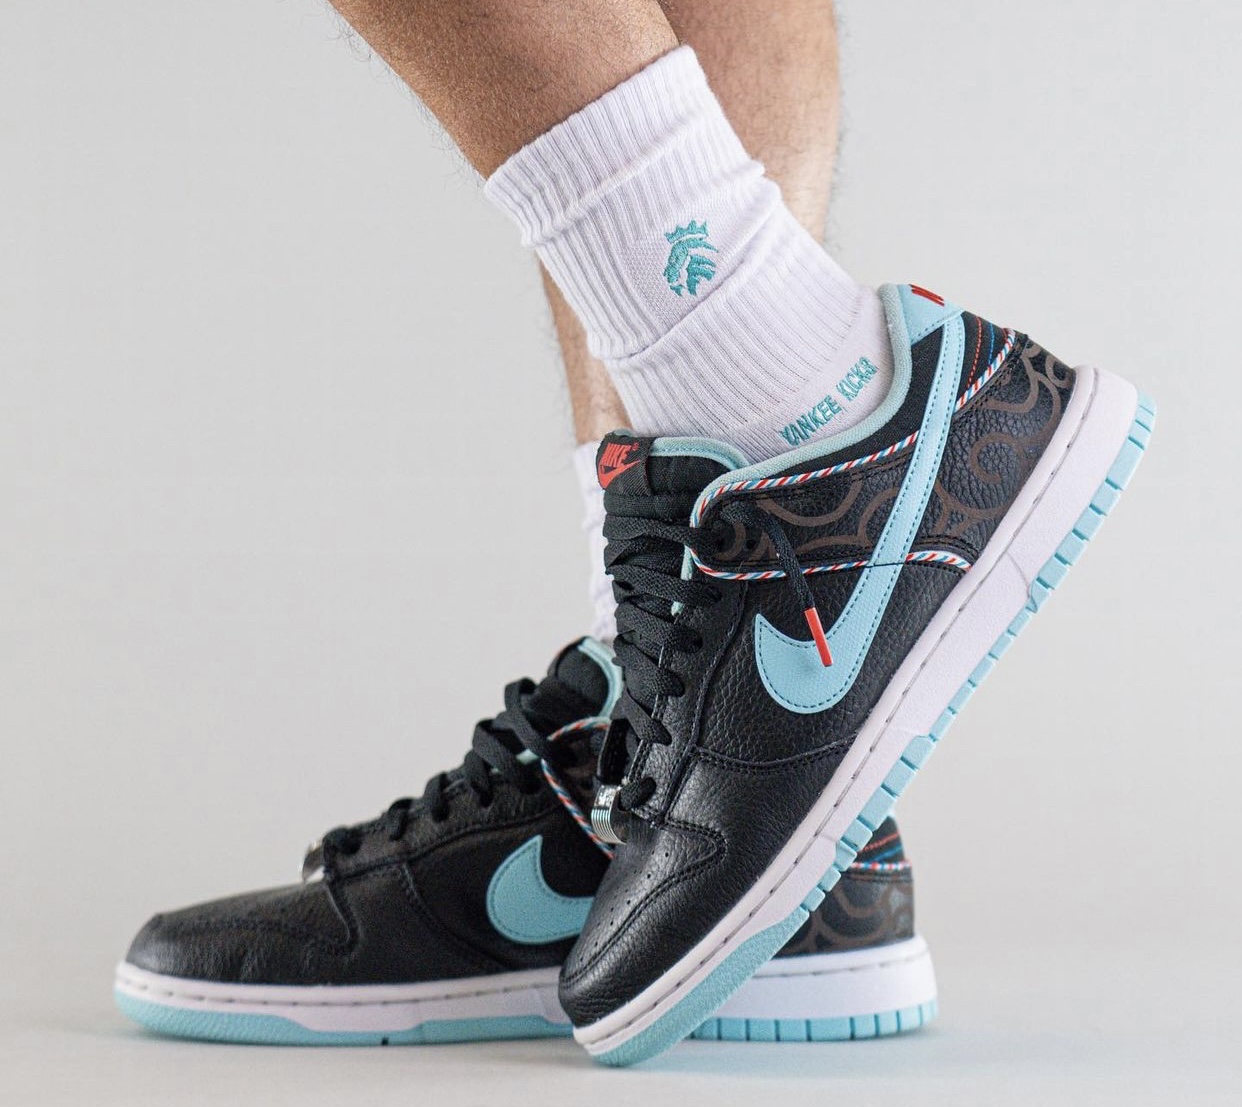 Nike Dunk Low Barbershop DH7614-001 DH7614-500 Release Date - SBD